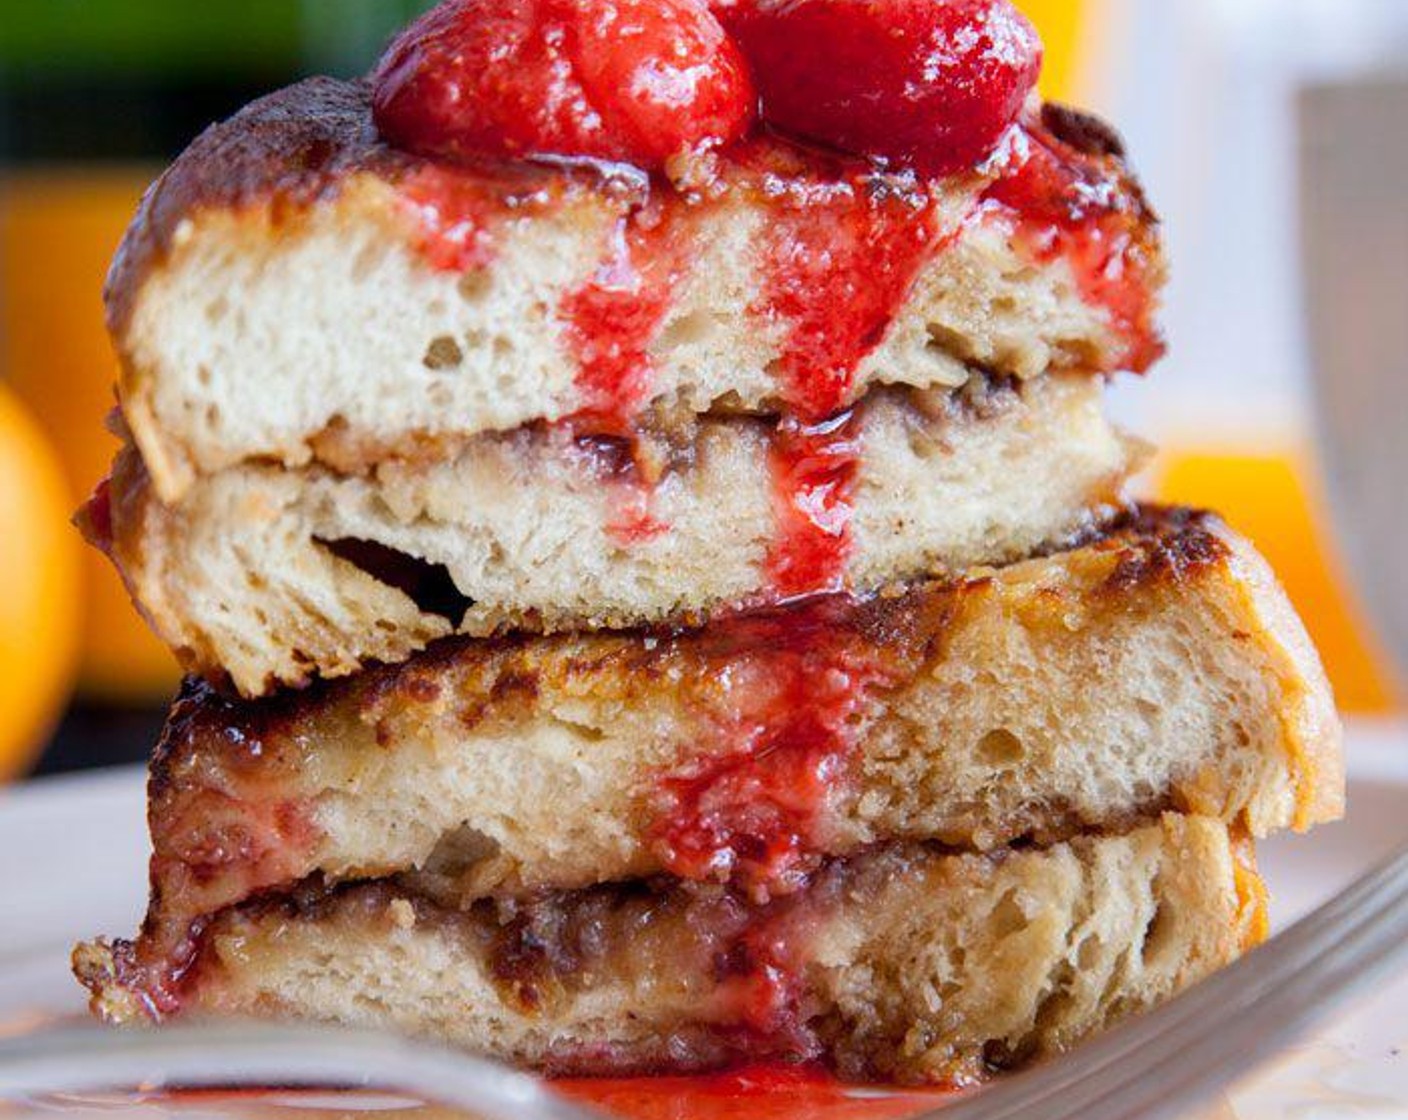 Vegan Peanut Butter and Jelly French Toast